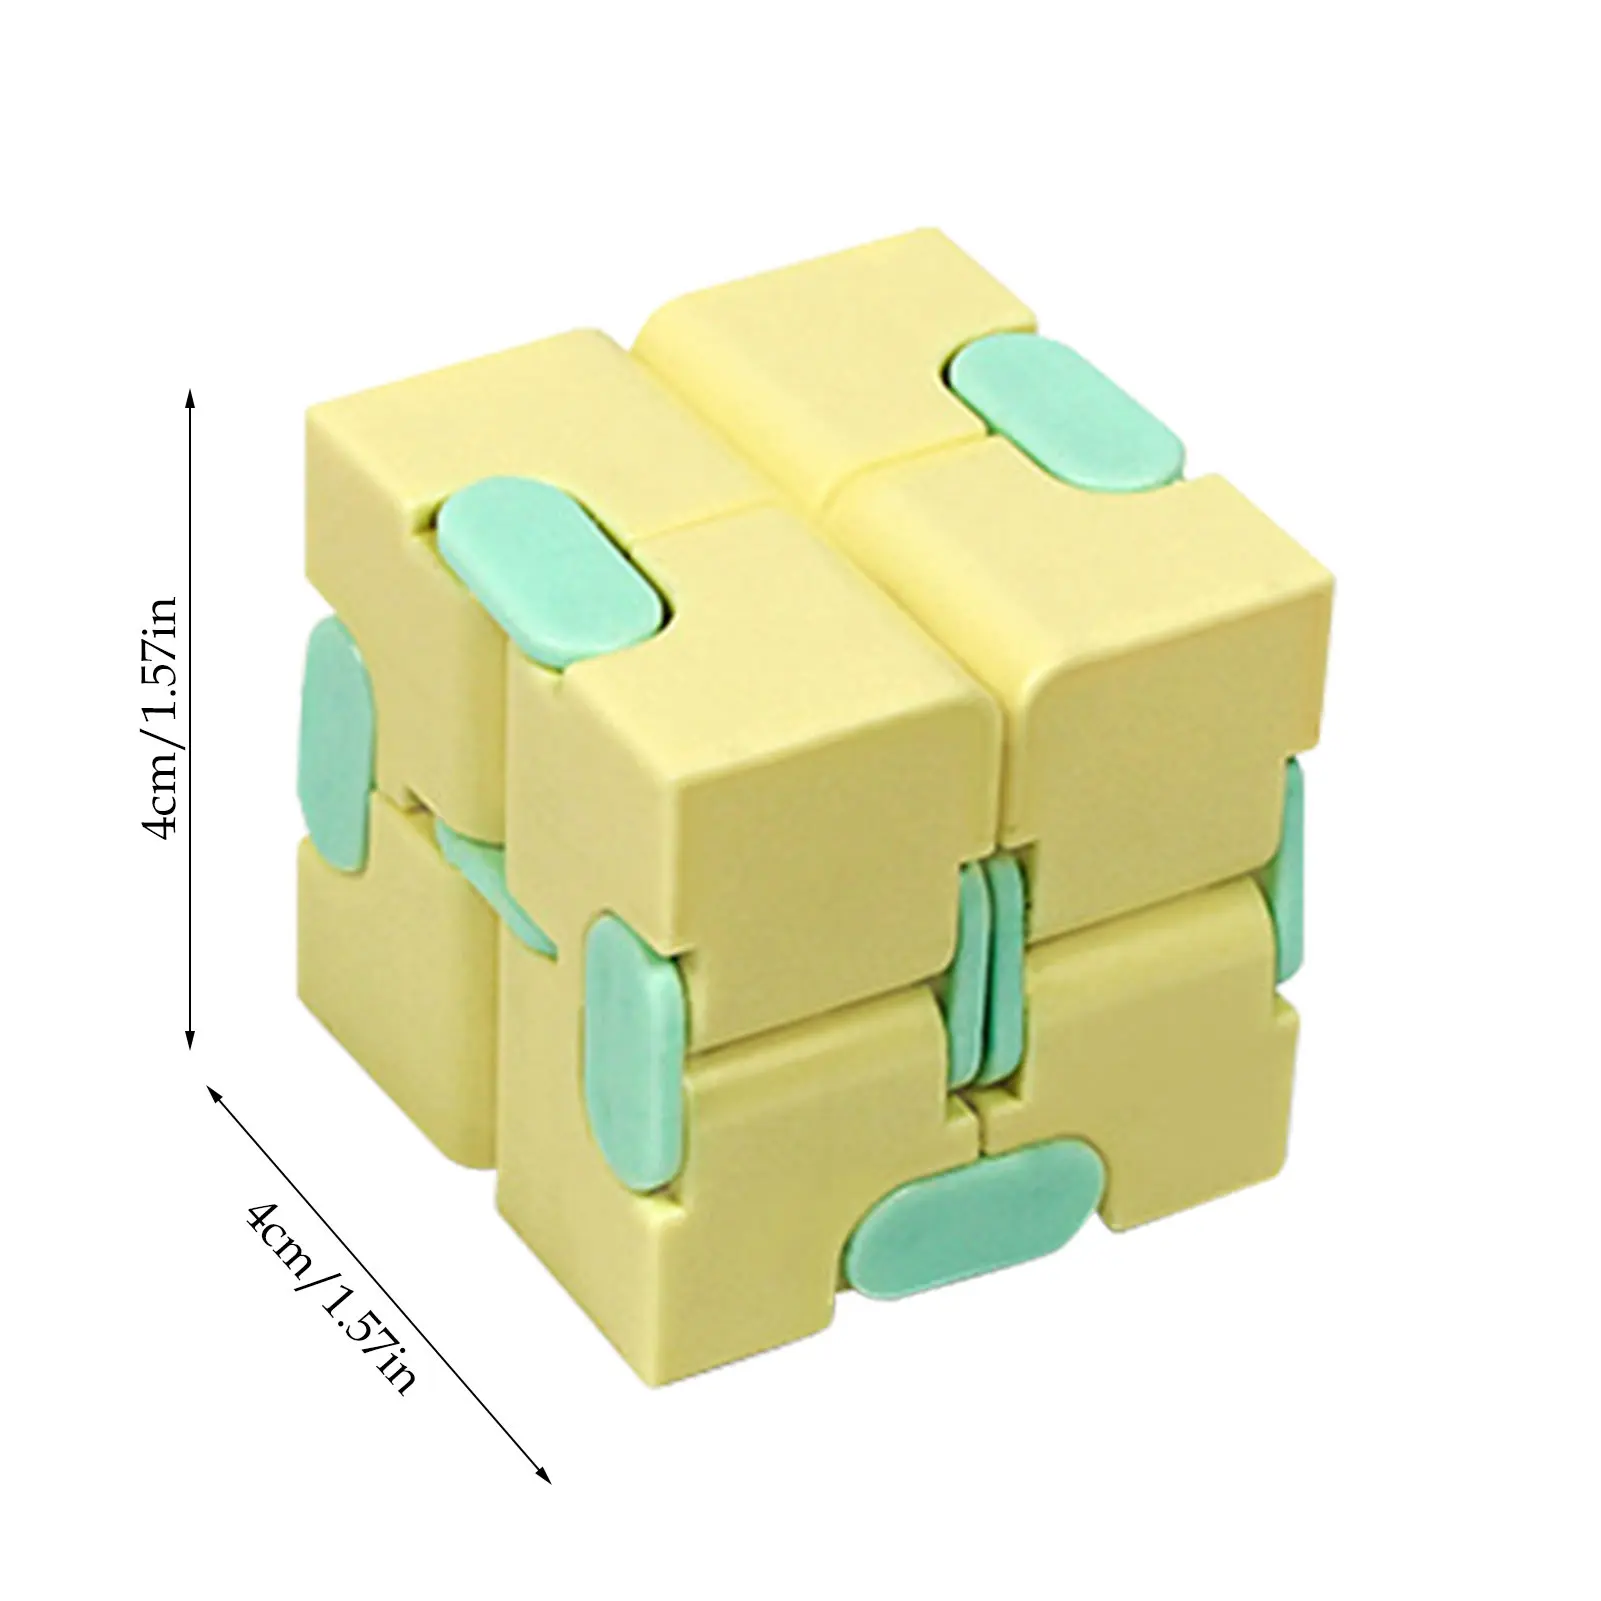 Details about   Children Adult Decompression Toy Infinity Magic Cube Puzzle Relieve Stress Toy 